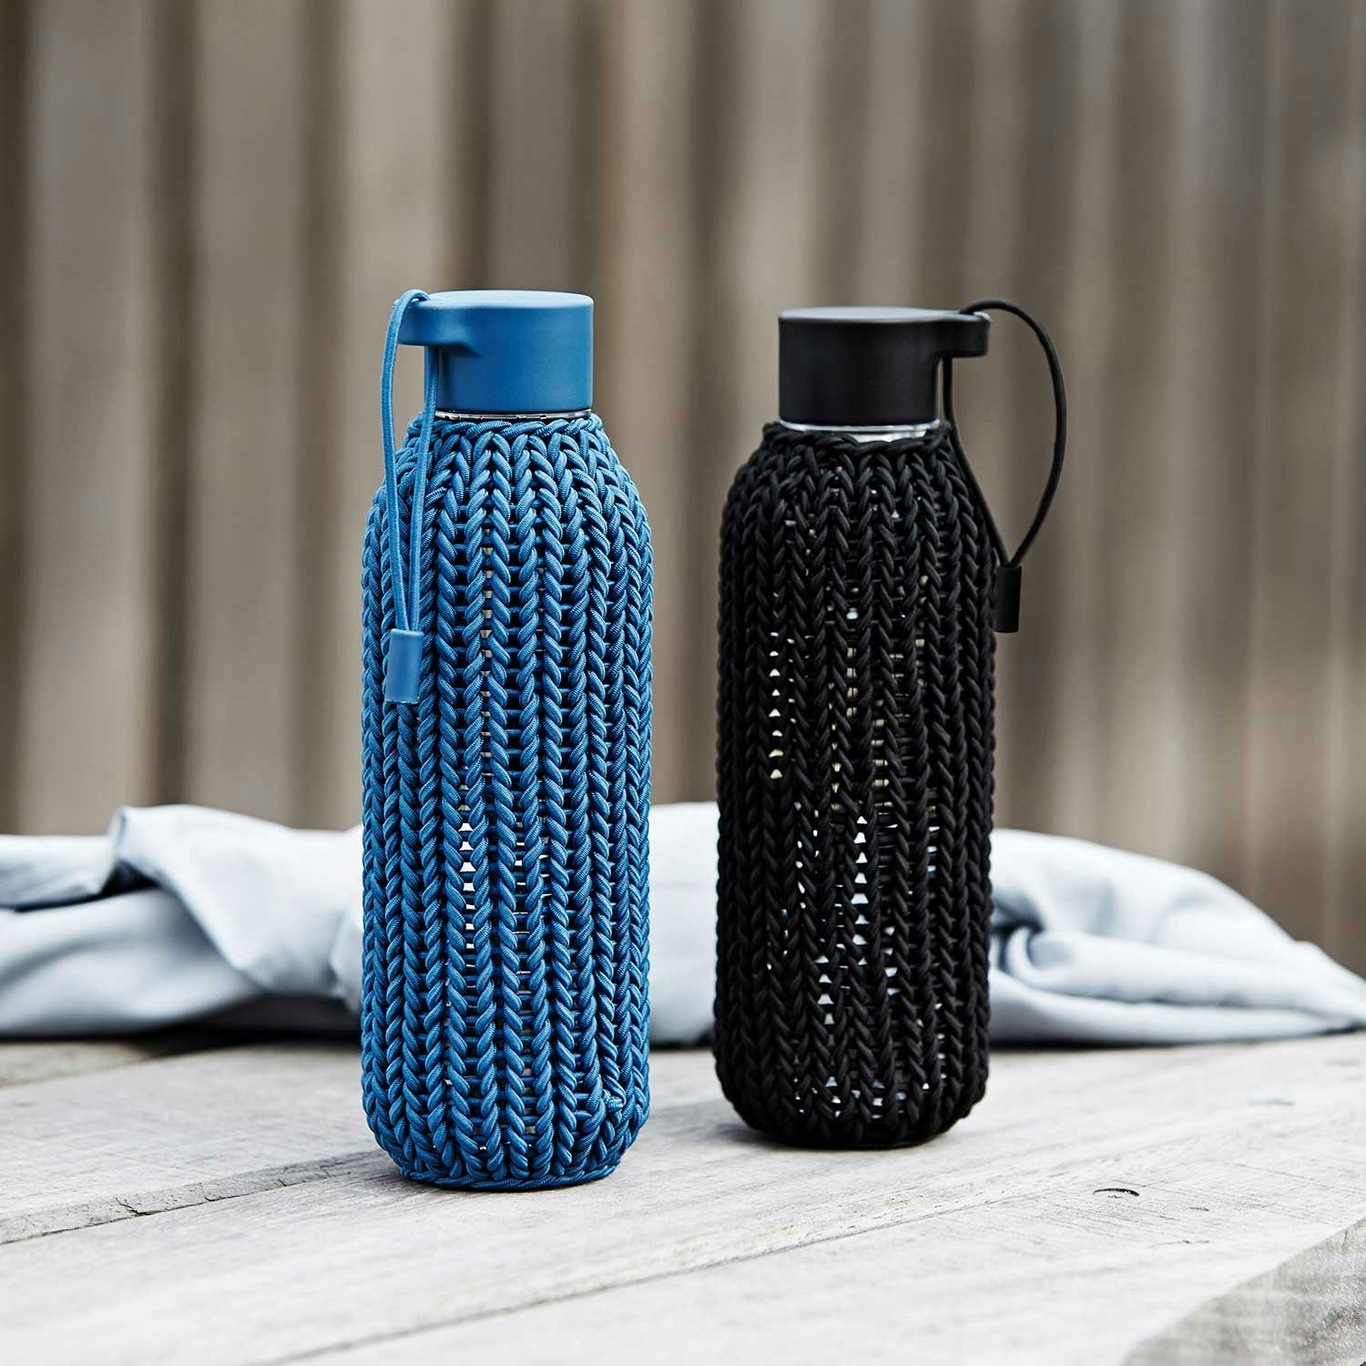 https://royaldesign.com/image/11/rig-tig-by-stelton-catch-it-drinking-bottle-60-cl-1?w=800&quality=80